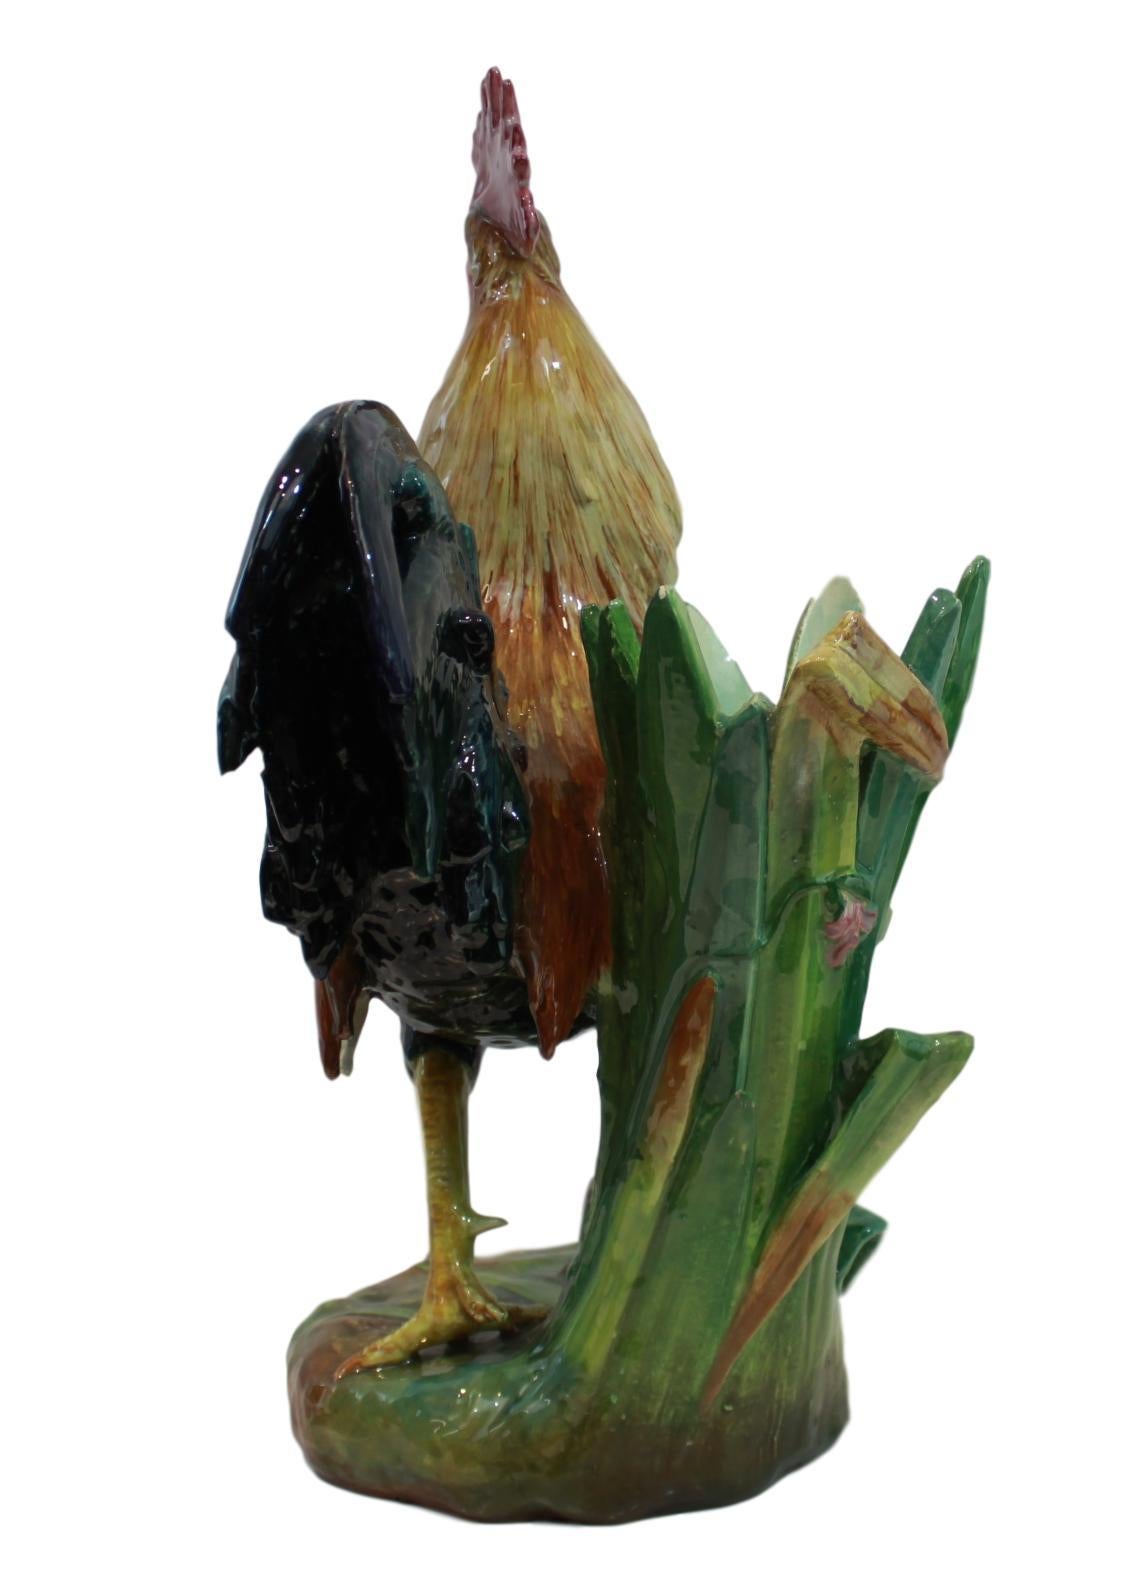 19th Century Very Large Majolica Rooster Vase by Jerome Massier, French, circa 1880